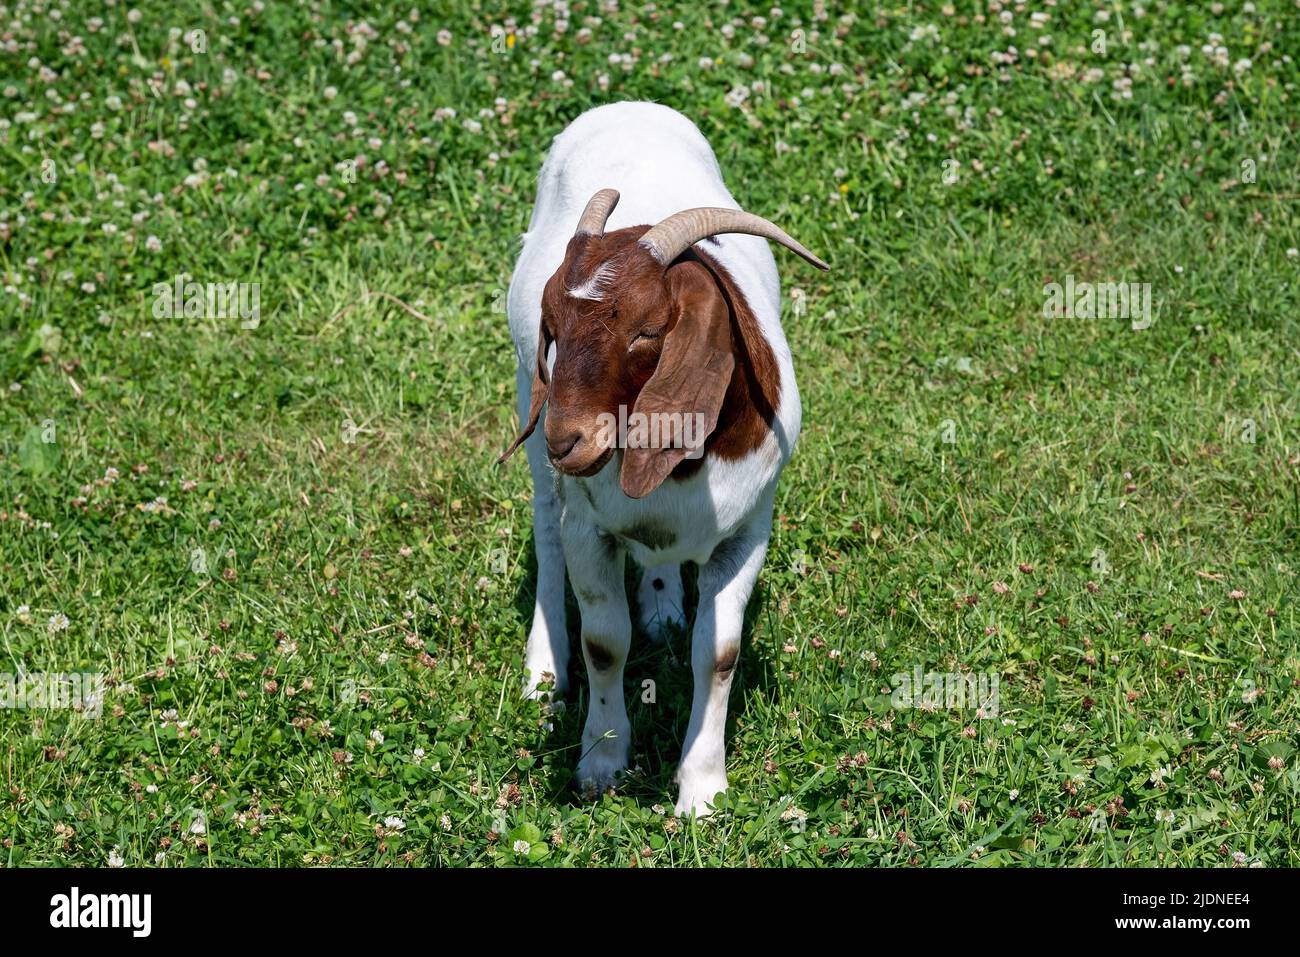 Boer goat in a pasture. This breed of goat that was developed in South Africa in the early 1900s for meat production. Stock Photo